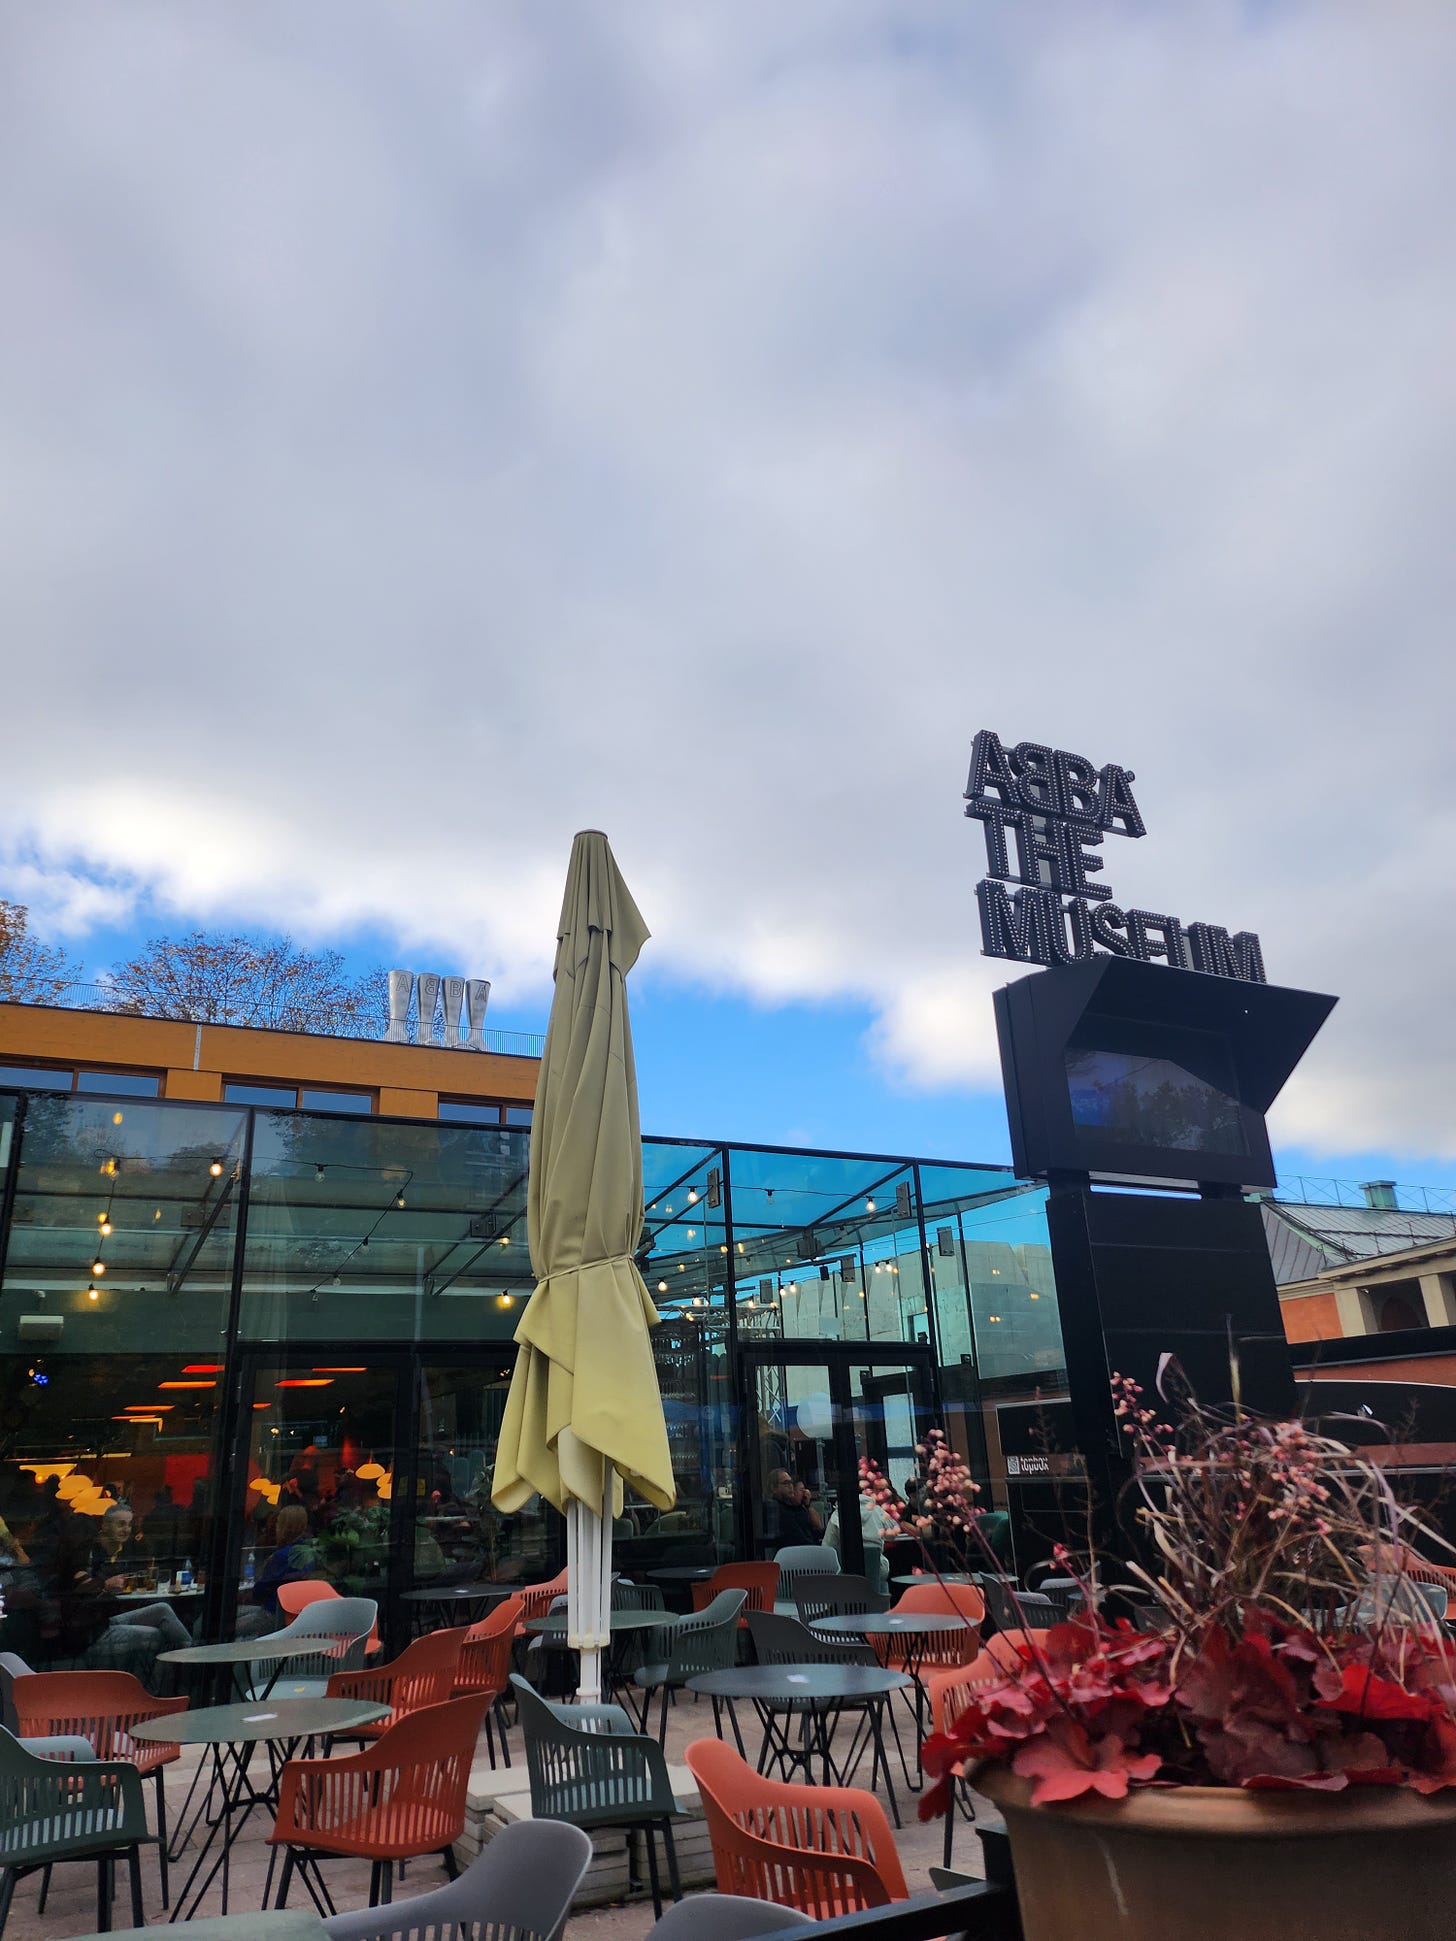 Against a cloudy sky, with just a hint of blue, the sign for Abba The Museum in black caps lock stands starkly. Below is an outdoor cafe setting with tables and chairs. 